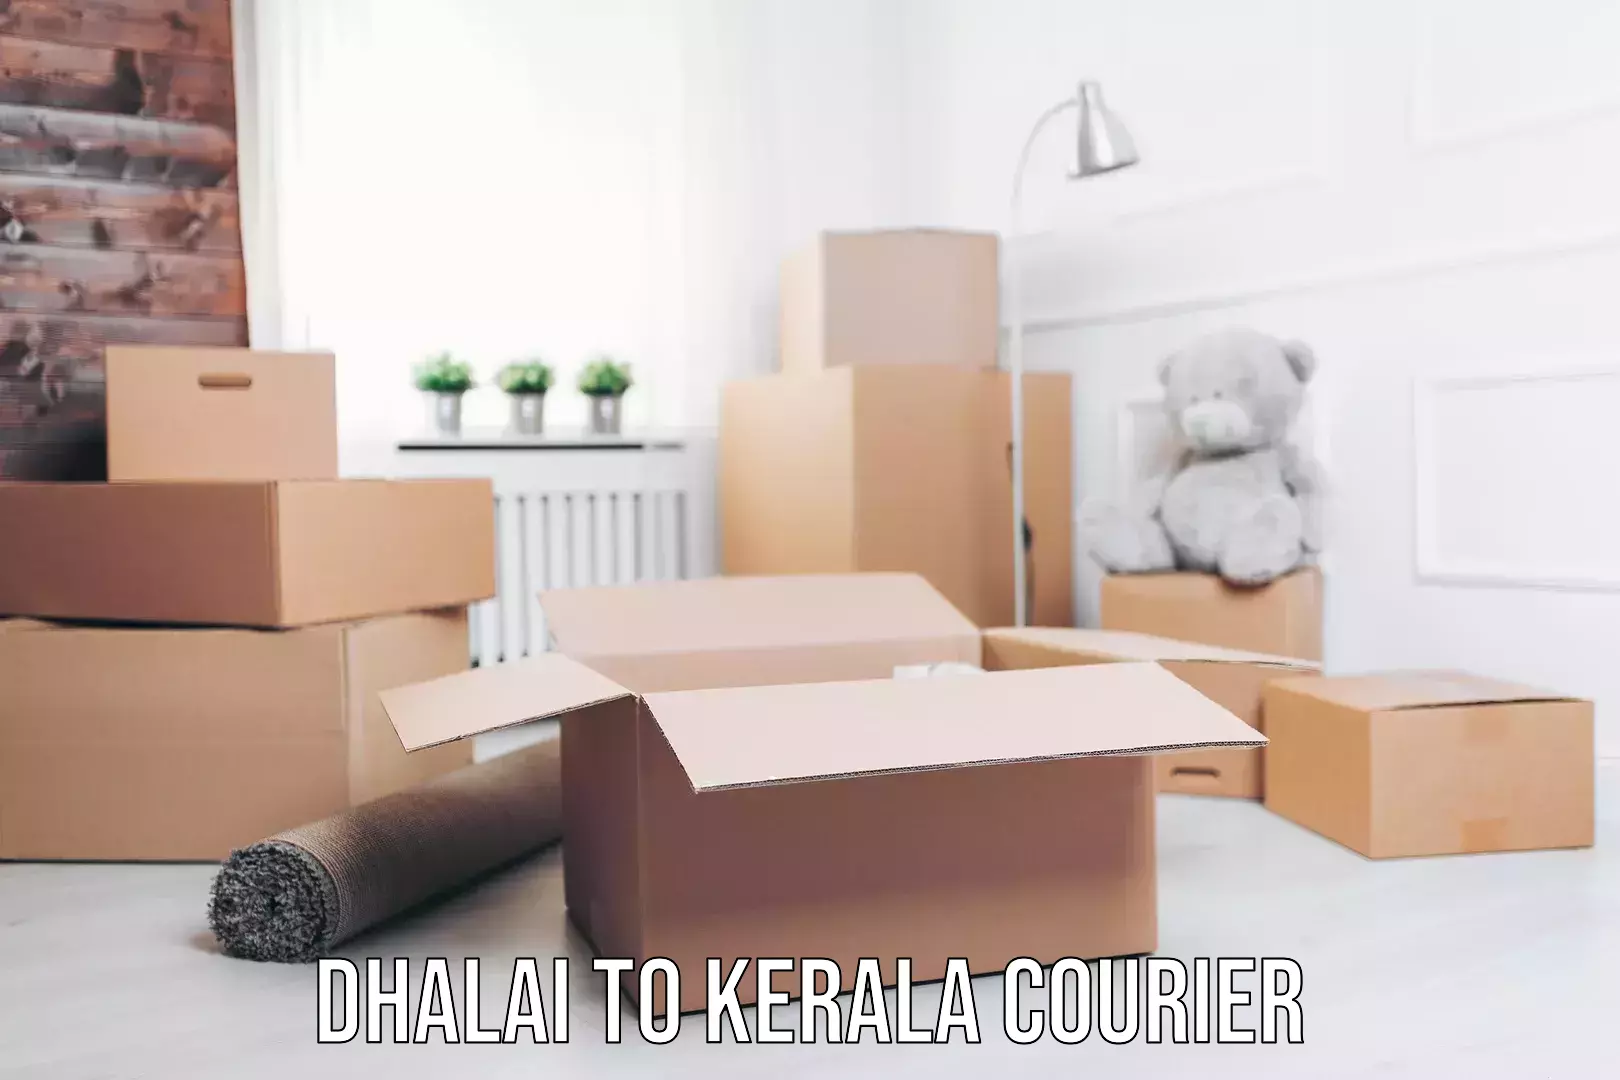 Parcel handling and care in Dhalai to Kerala